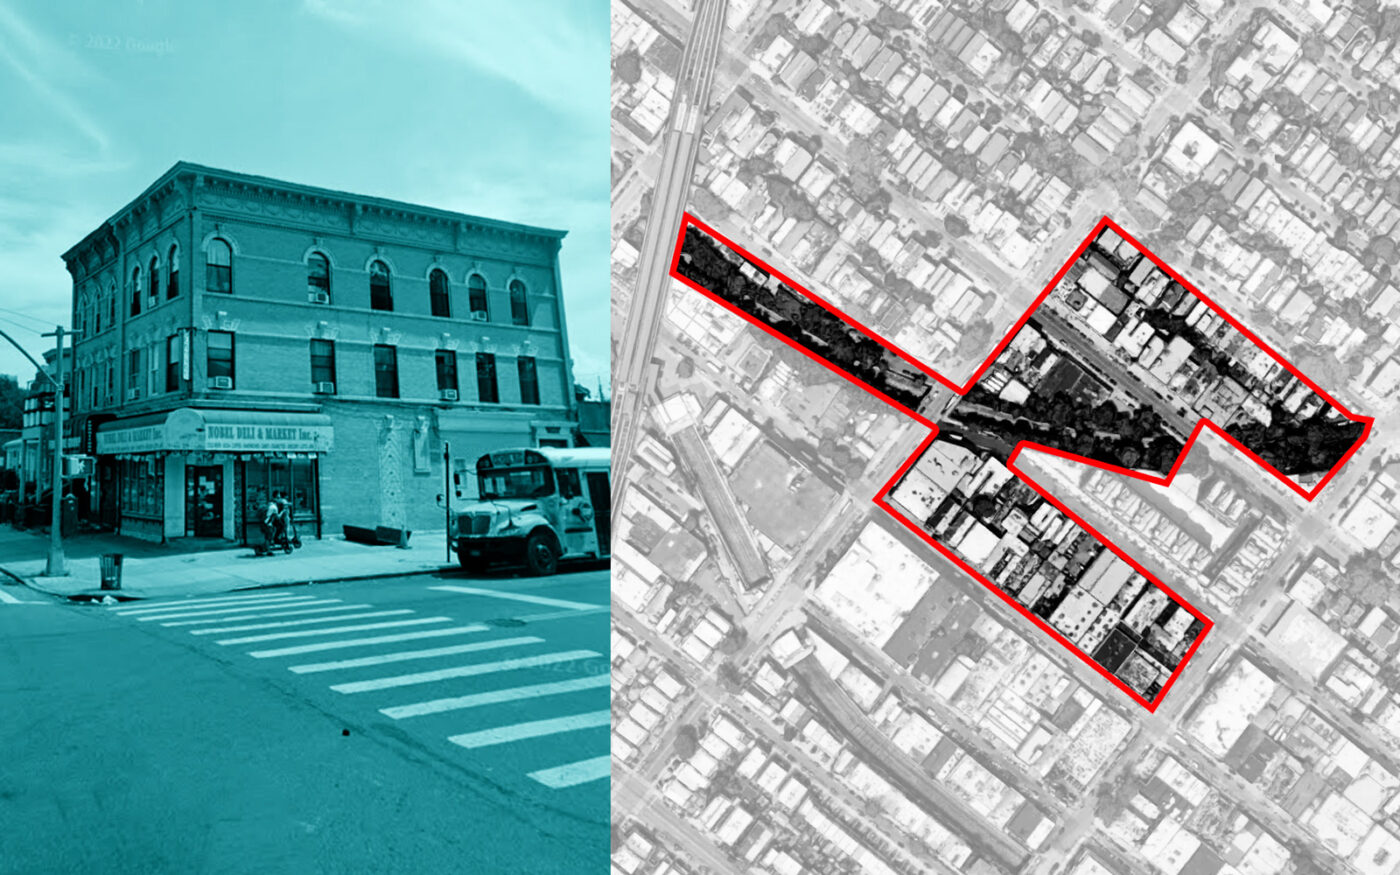 The site of the proposal roughly cornered by 14th and 16th Avenues and 59th and 61st Streets